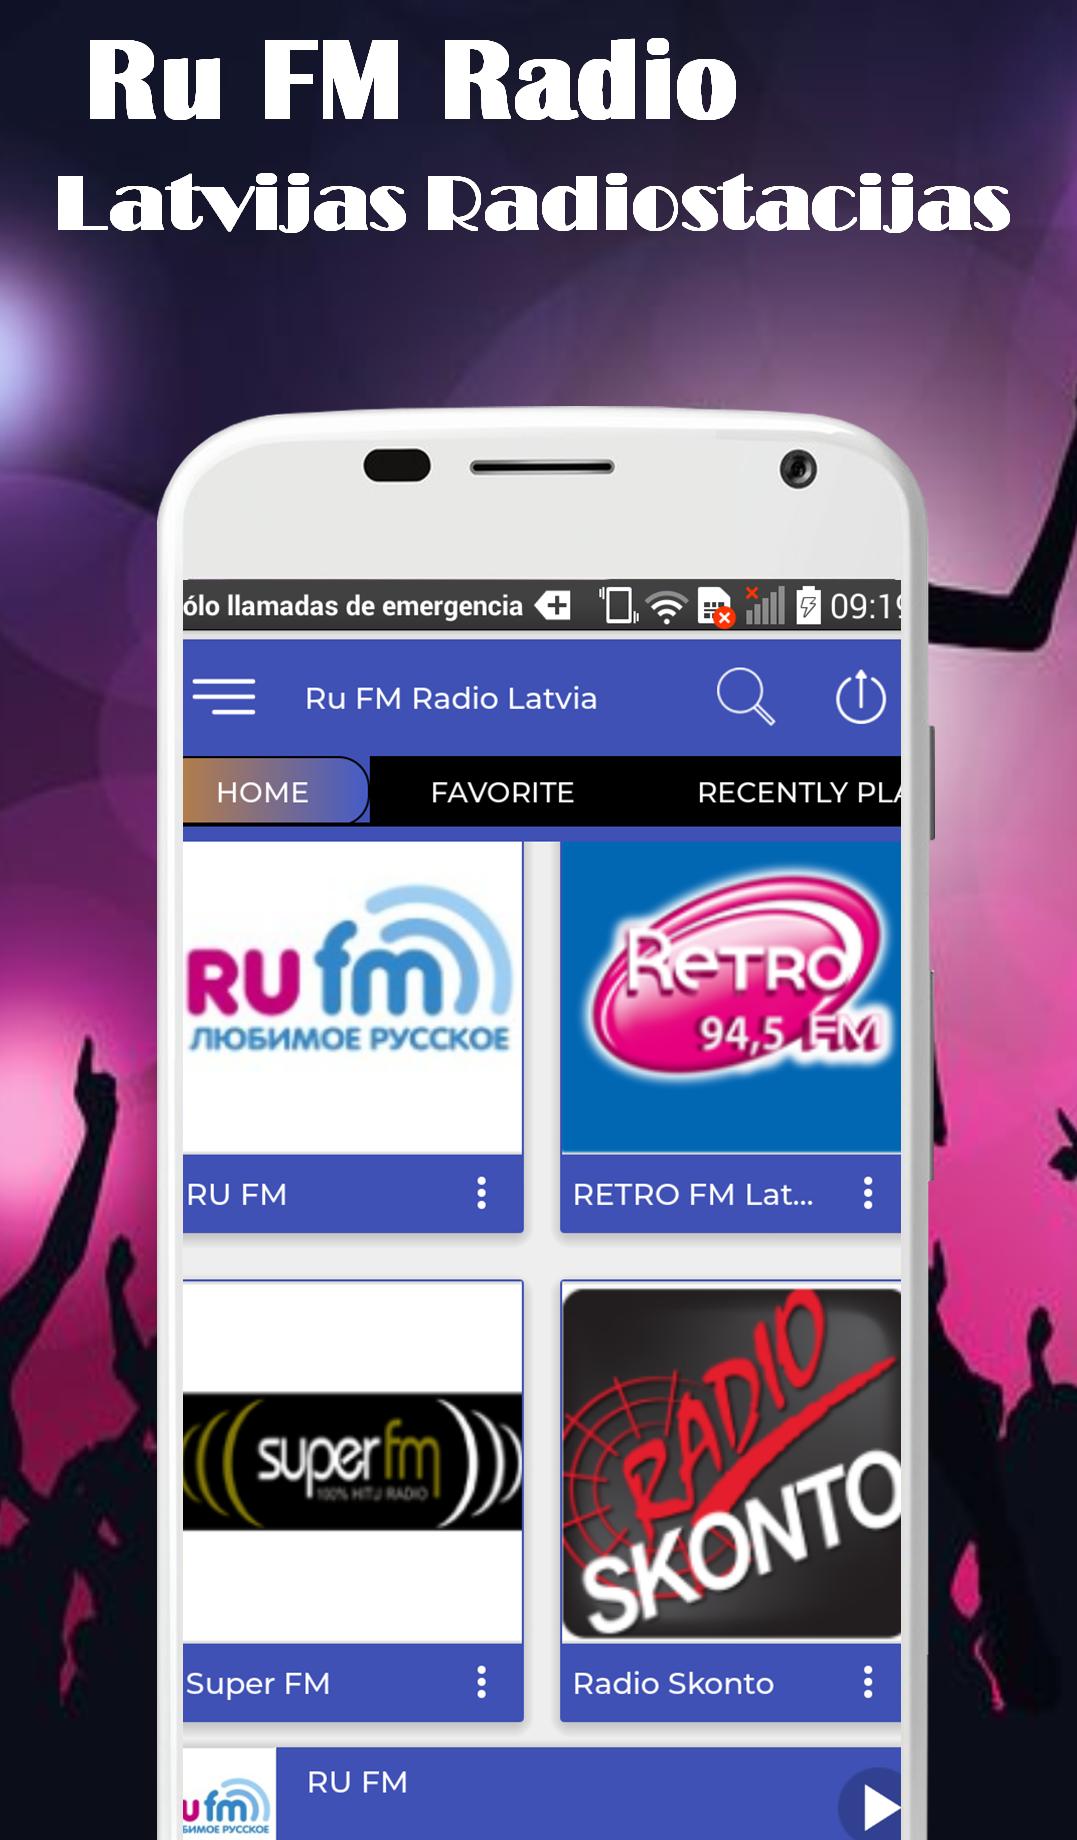 Ru FM Radio Latvia Free Online for Android - APK Download